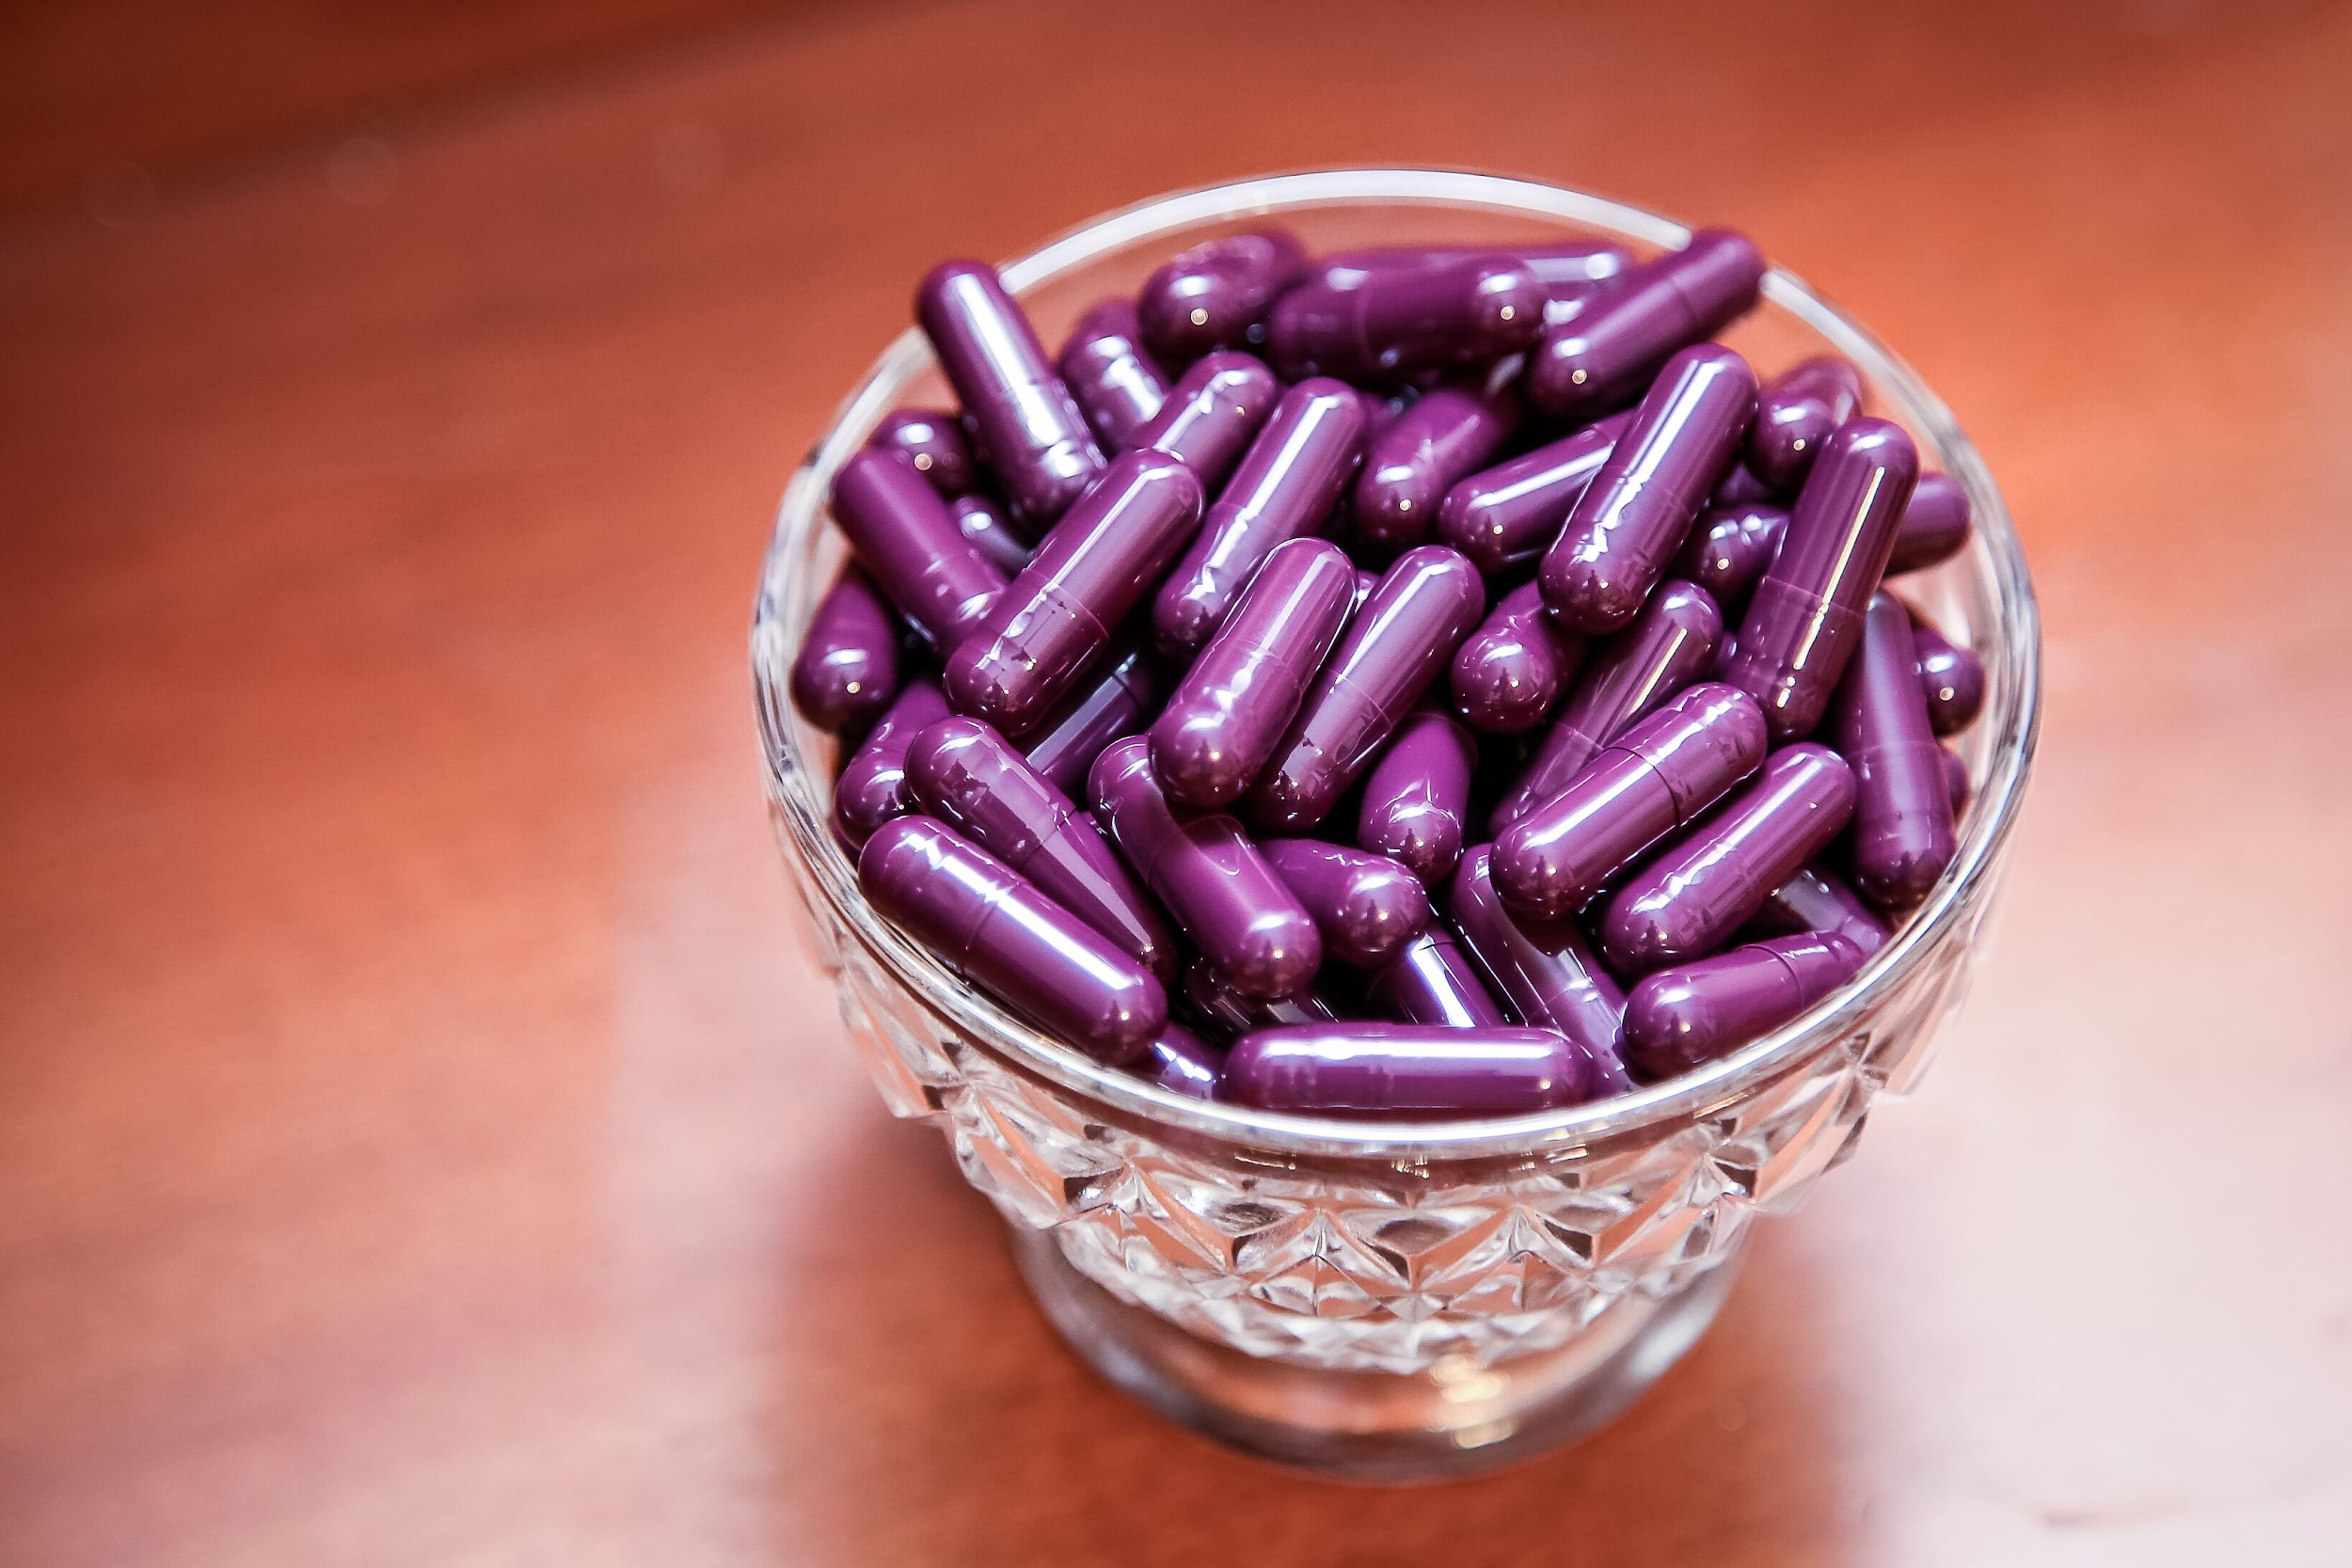 A glass full of purple placenta capsules